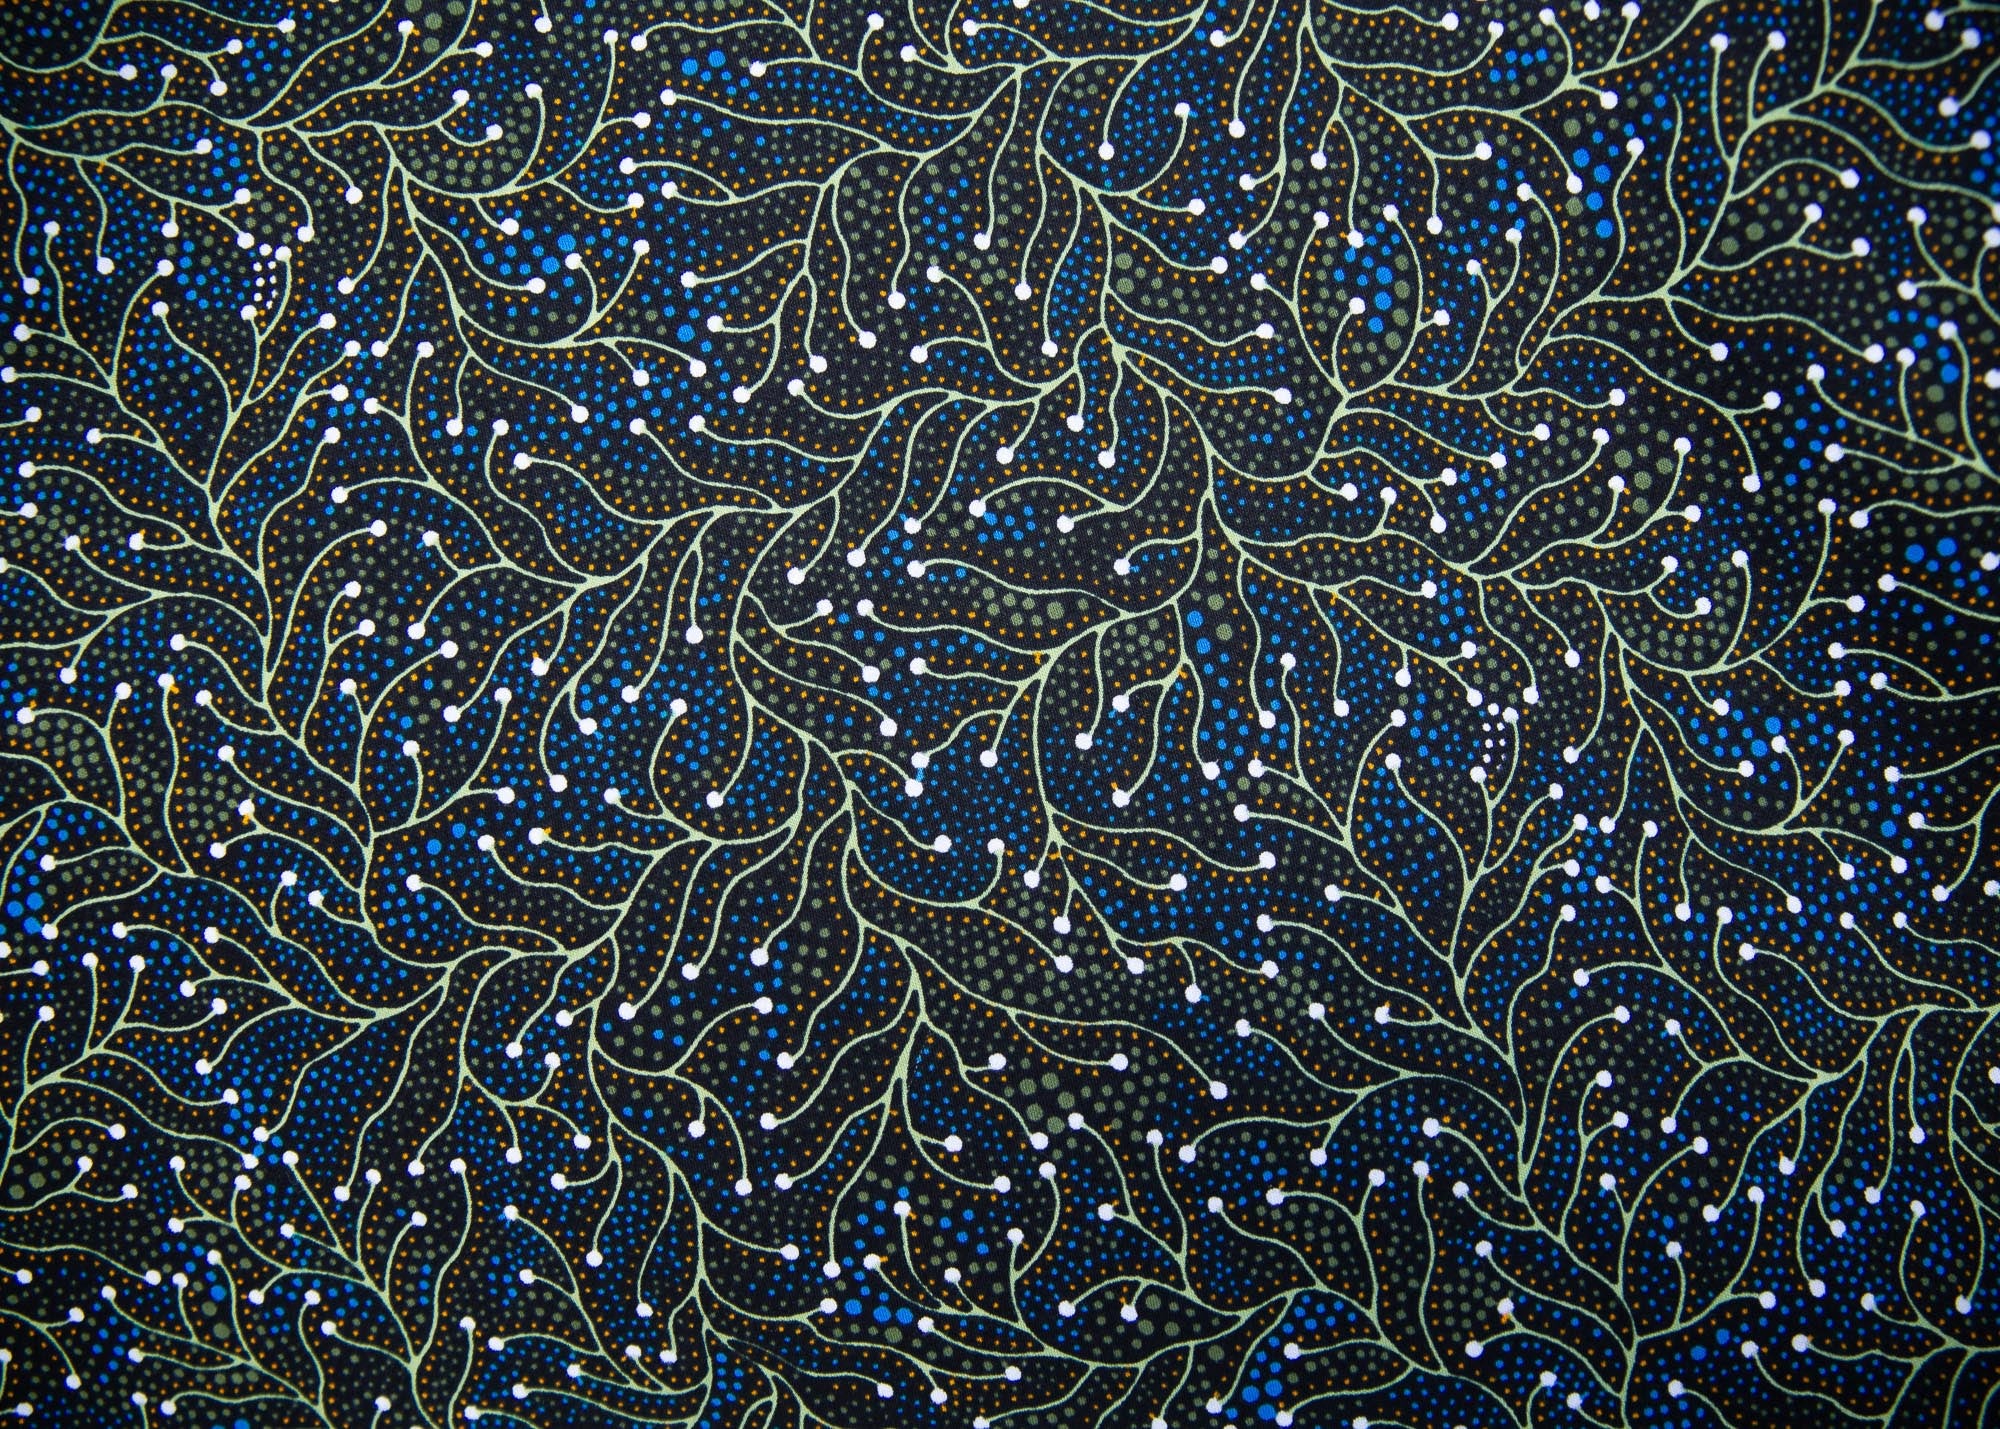 Close up display of blue, white, black , yellow and green vine print dress